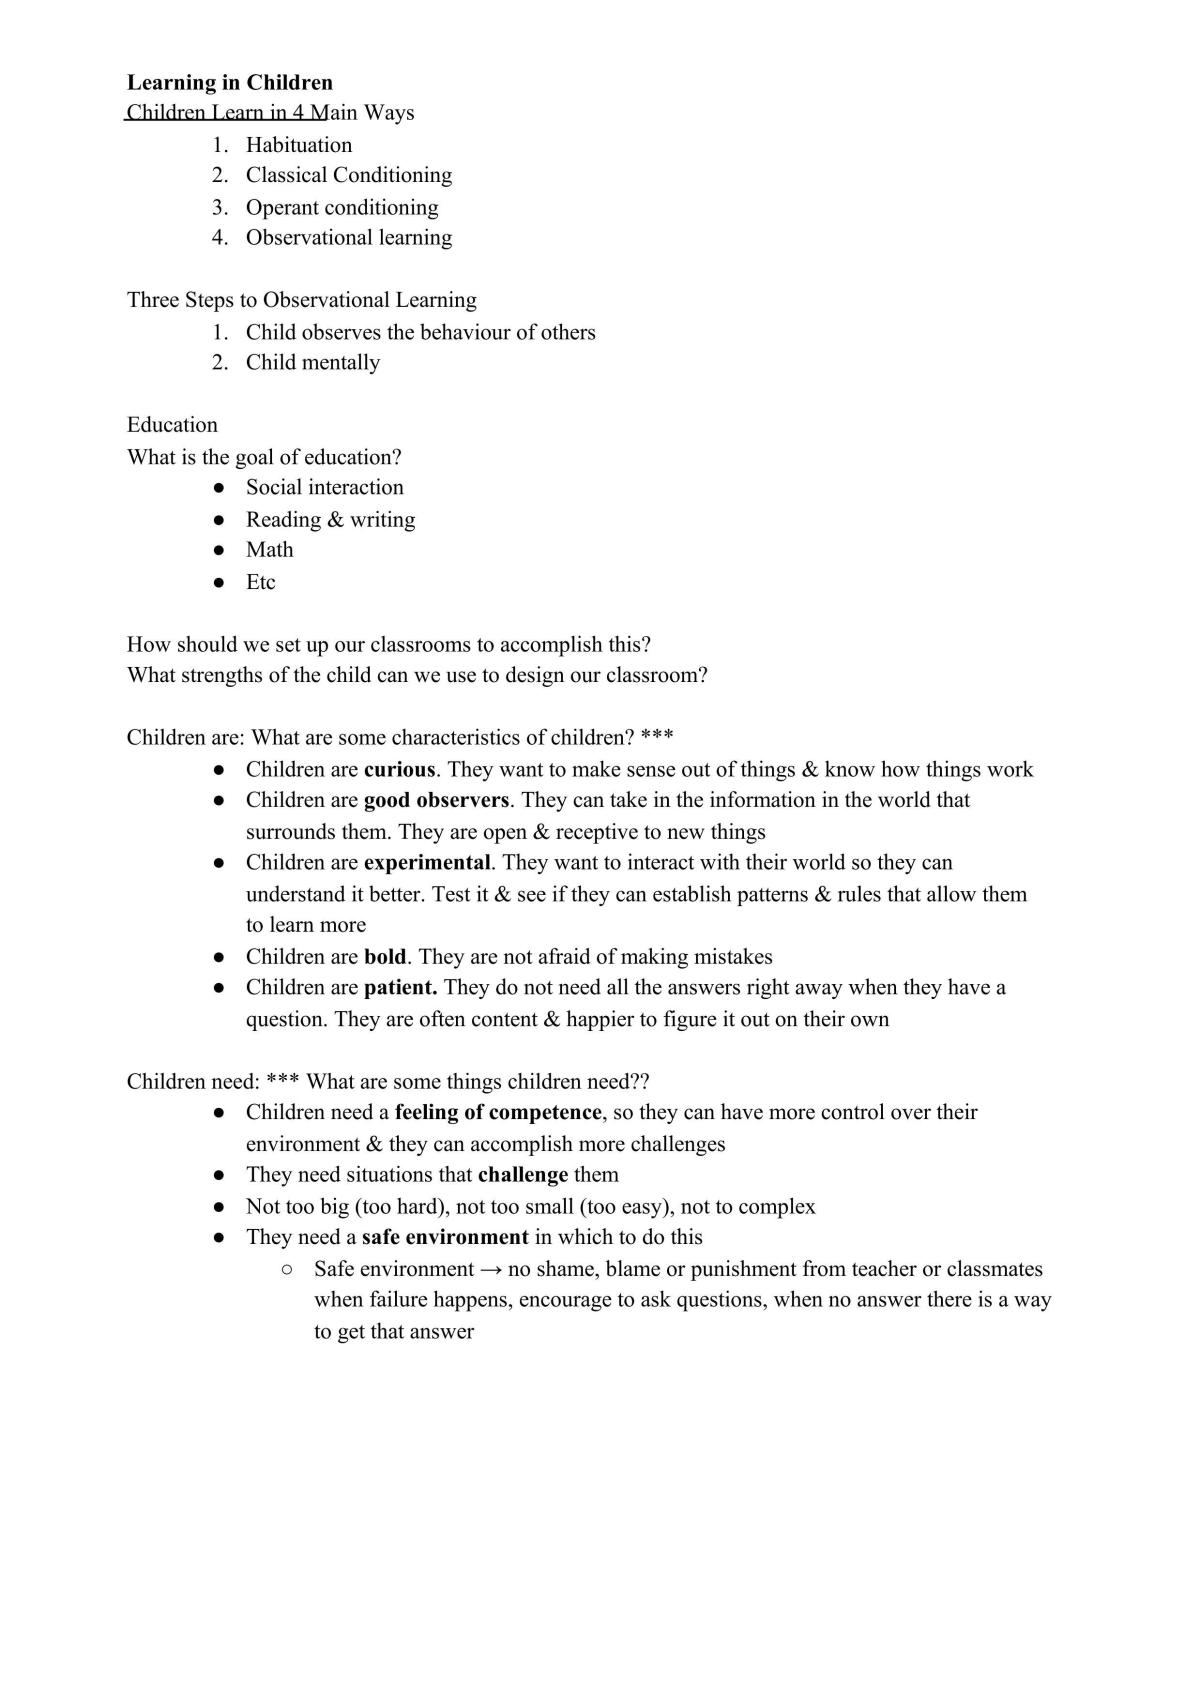 Learning Notes - Page 29